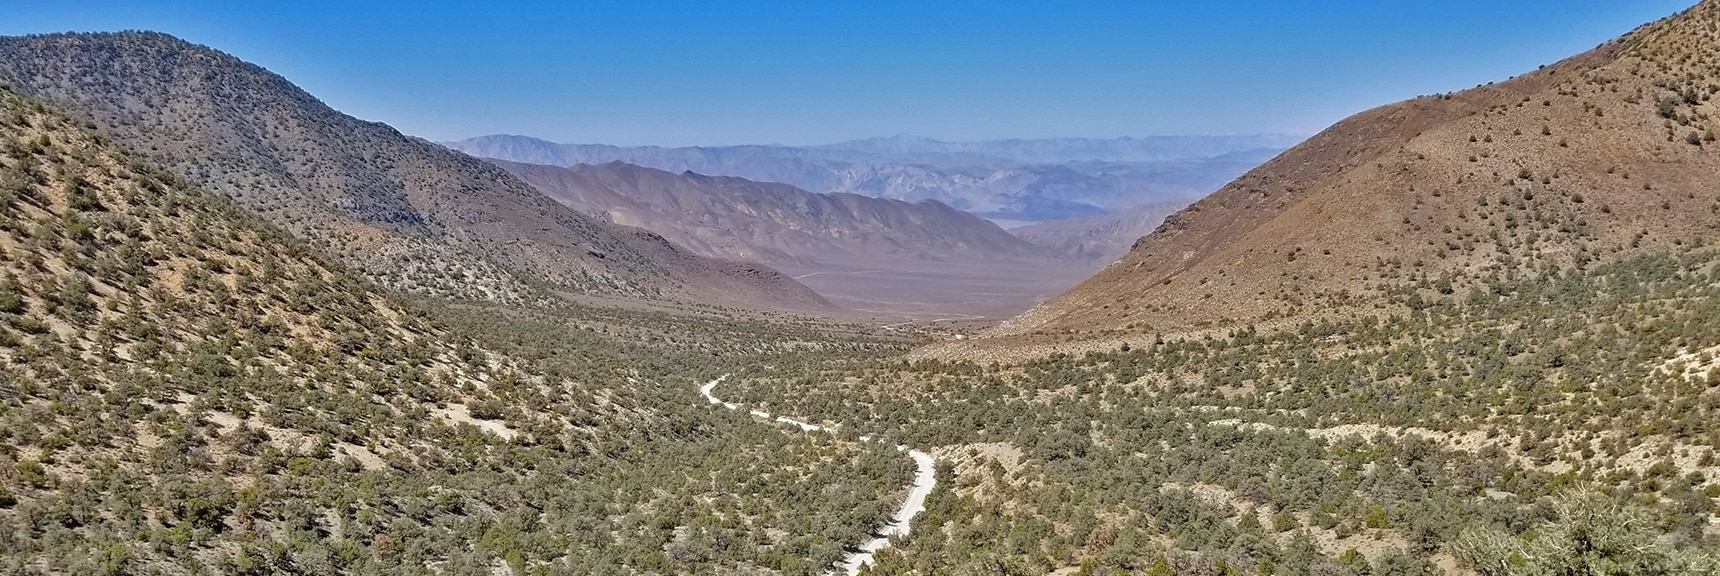 Charcoal Kiln Road and Emigrant Pass Road Area Viewed from Above Wildrose Peak Trailhead | Wildrose Peak | Panamint Mountain Range | Death Valley National Park, California